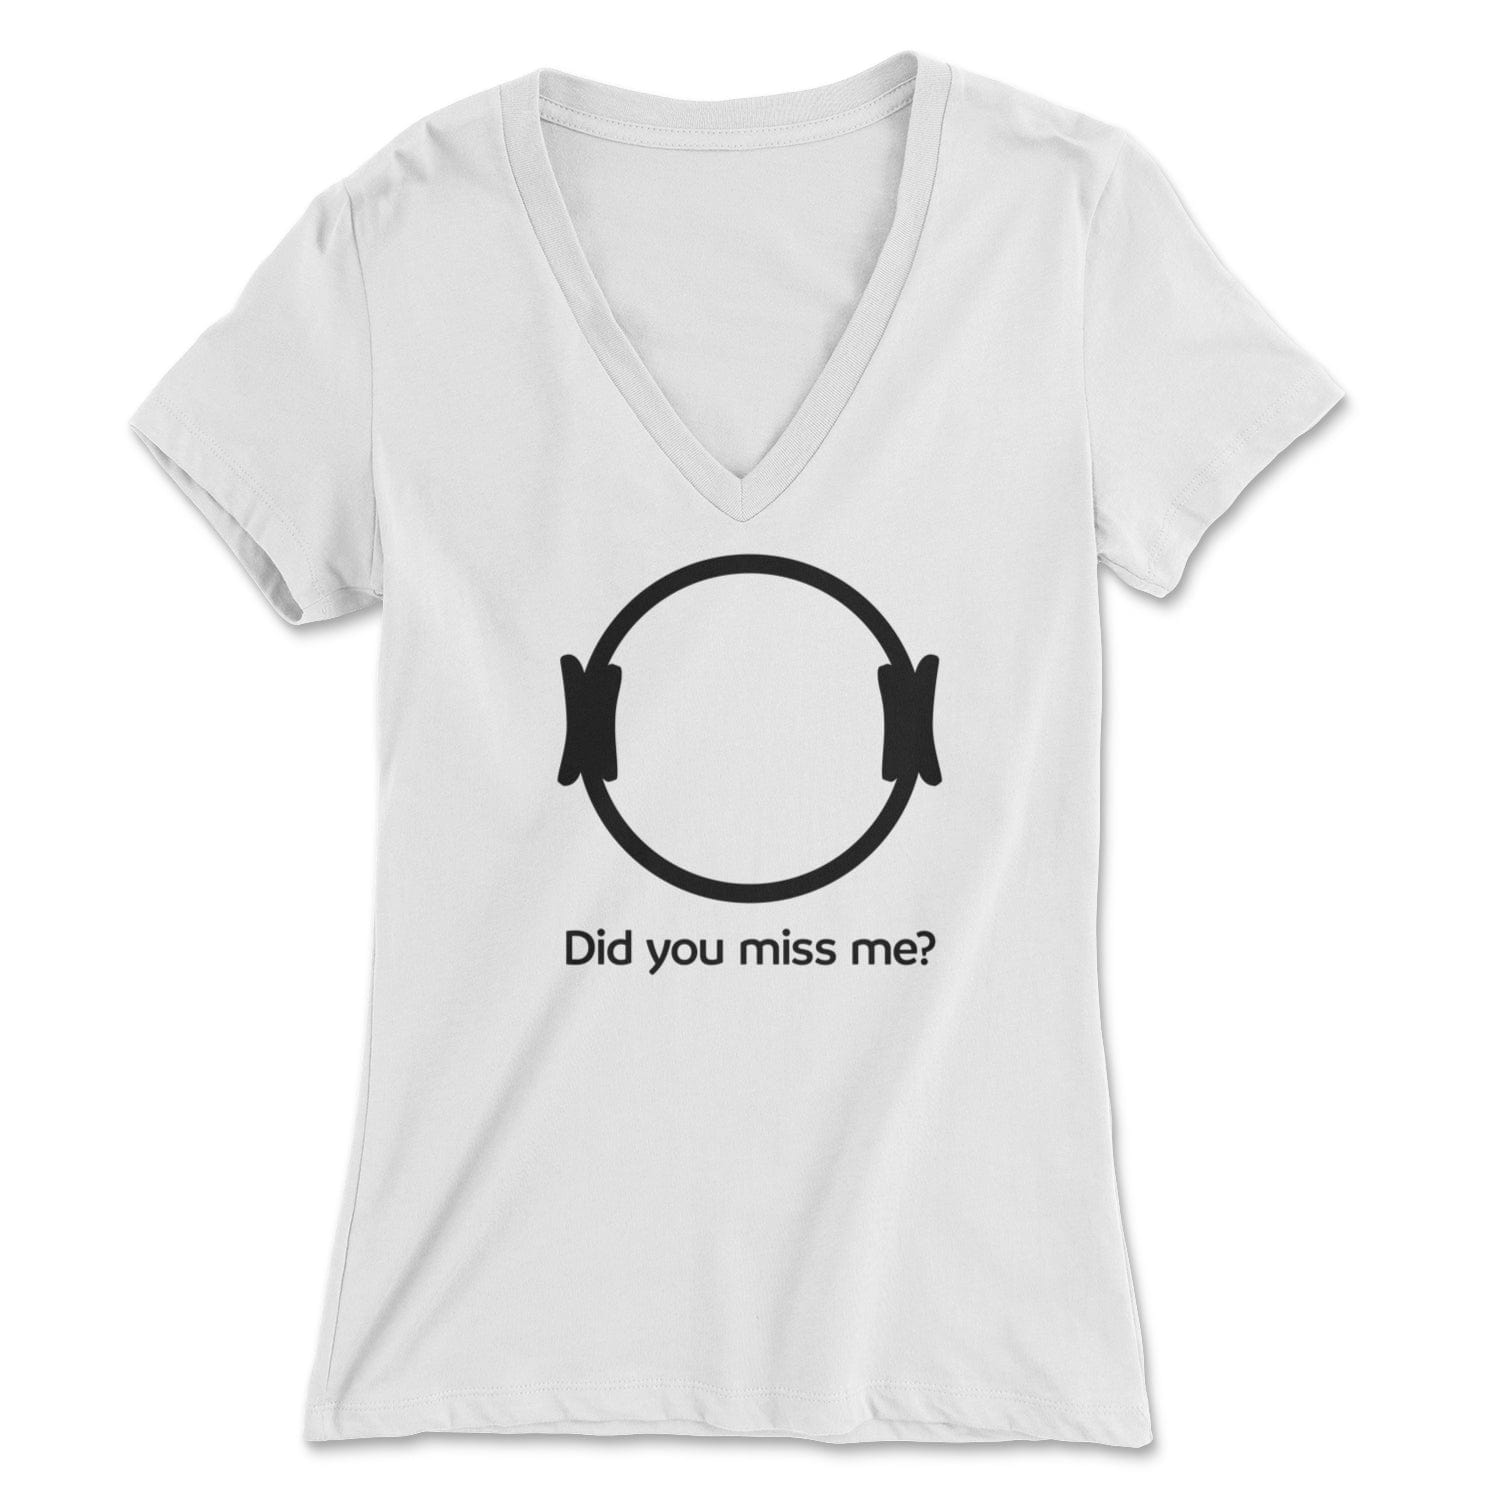 "Did You Miss Me?" Pilates Circle - Women's V-Neck Tee Skyba Print Material